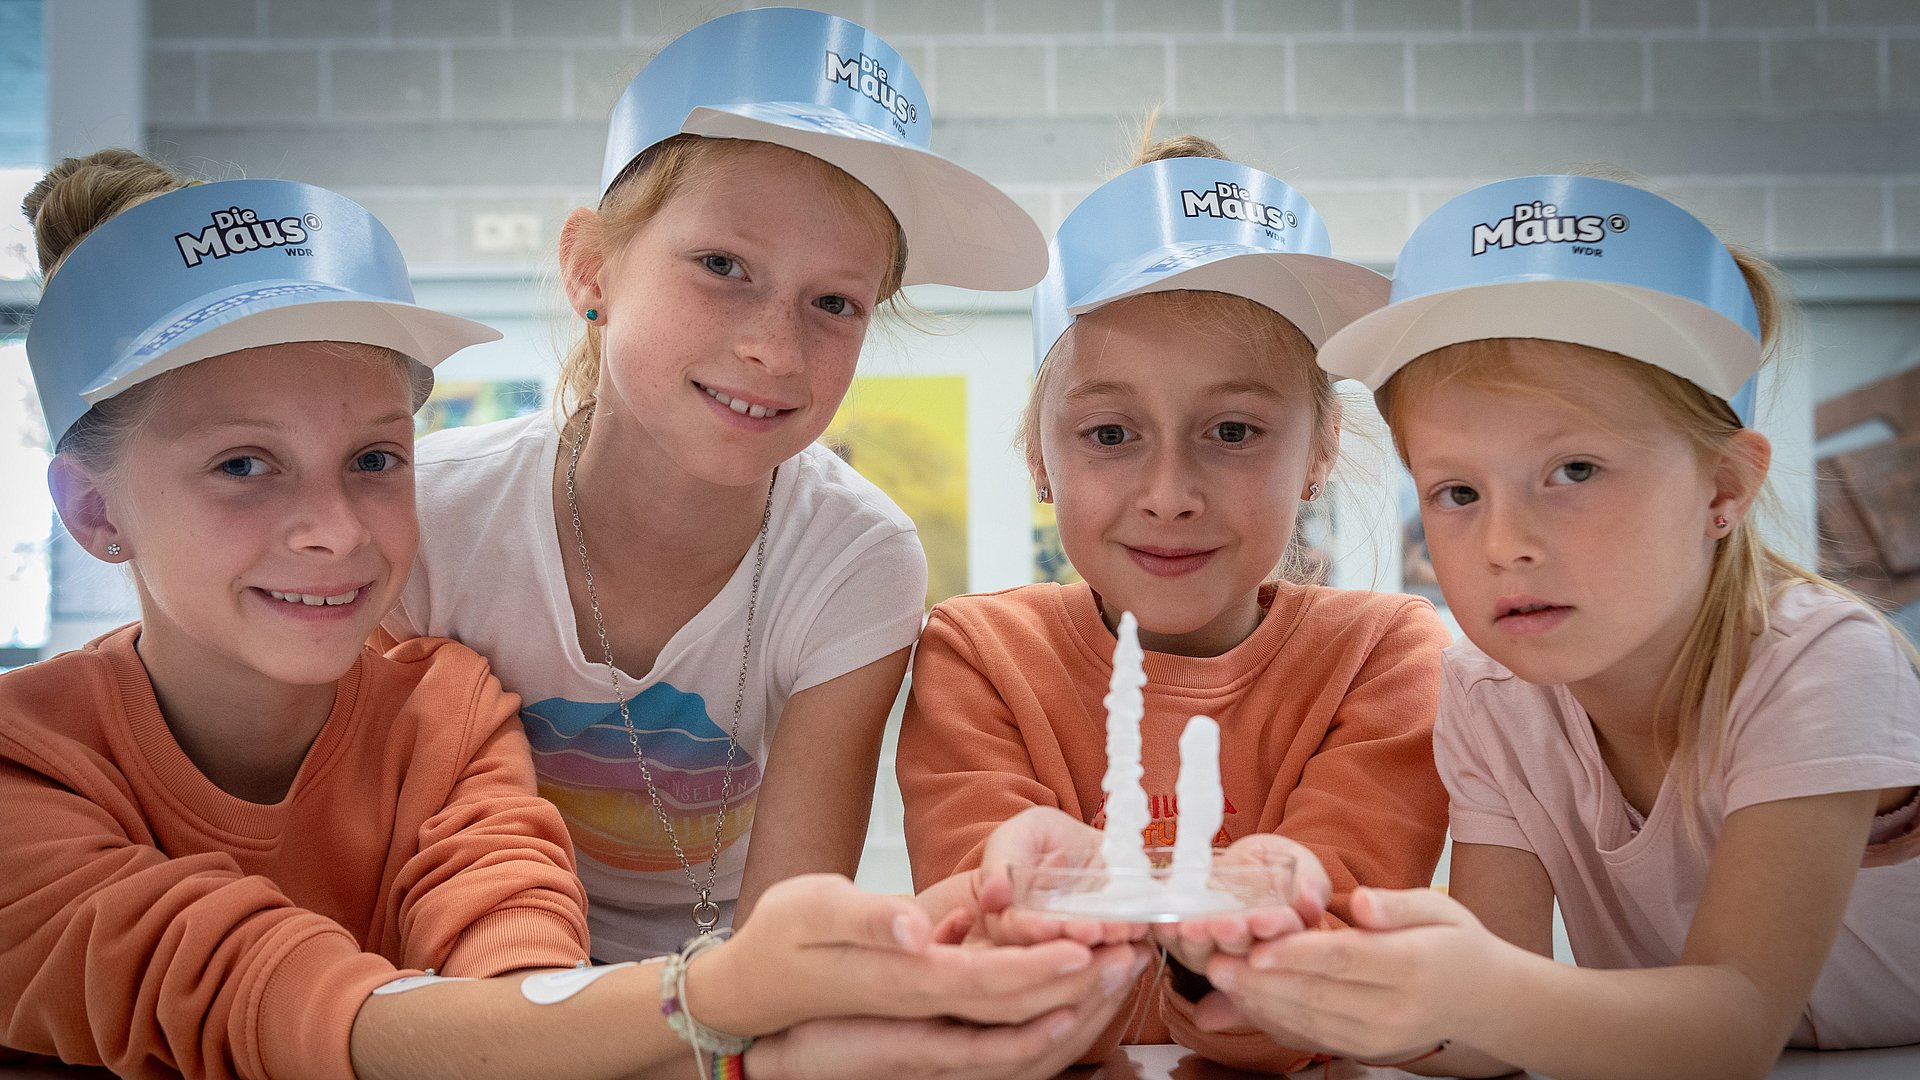 Four girls with Die-Maus caps holding a petri dish.